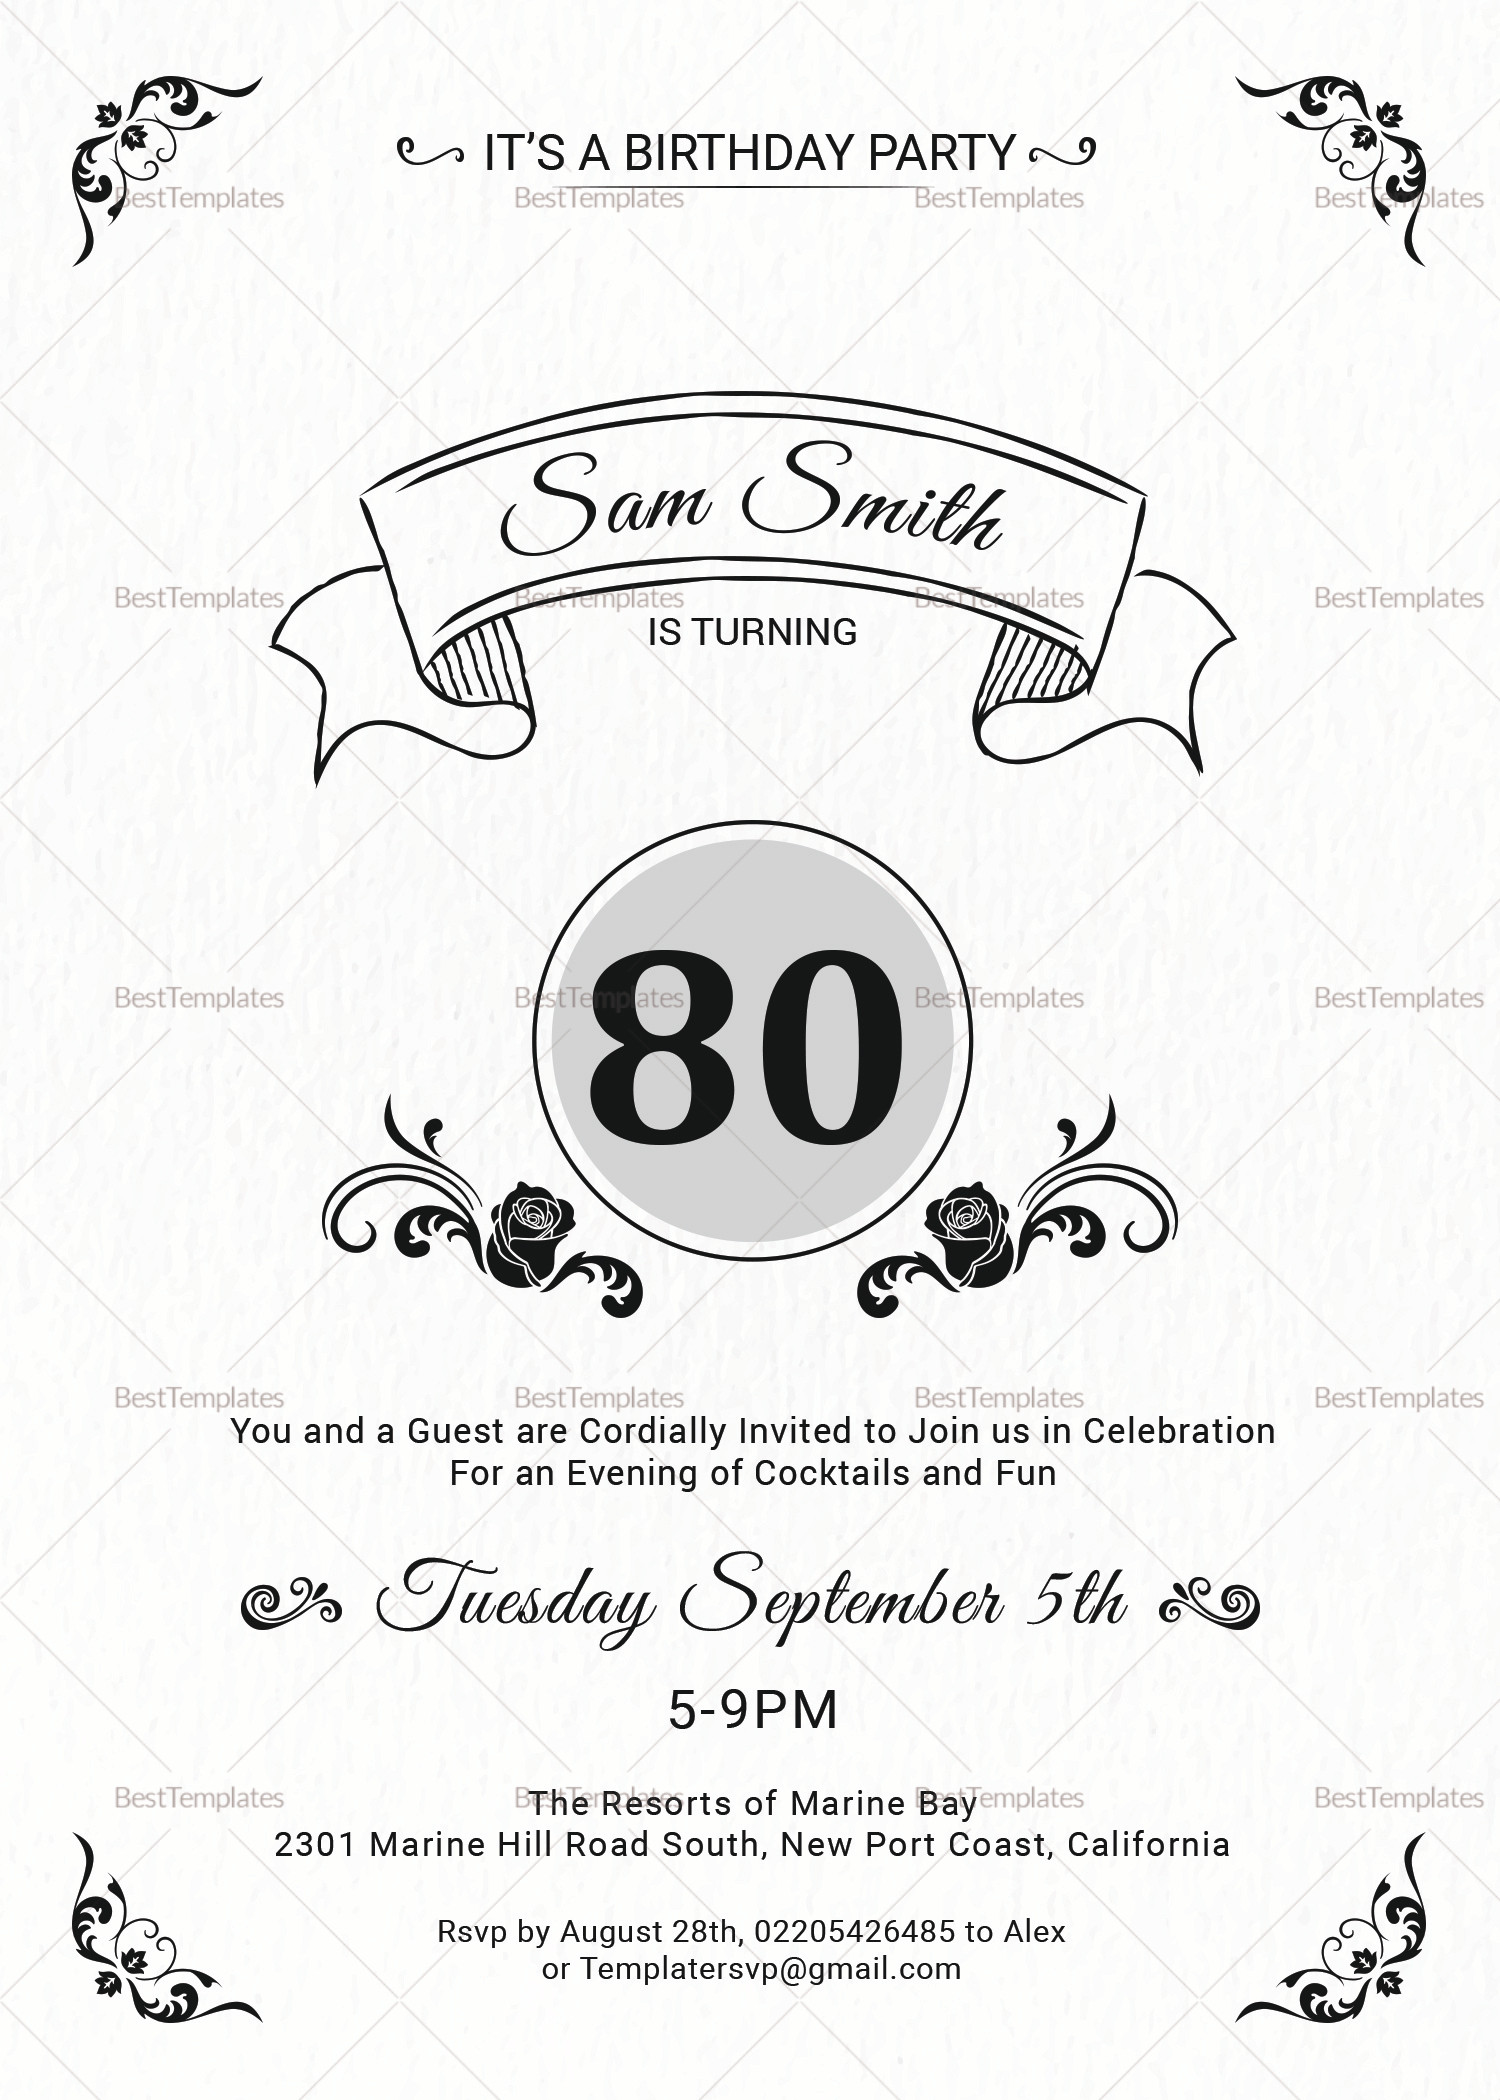 25 Ideas for 80th Birthday Invitations Templates - Home, Family, Style